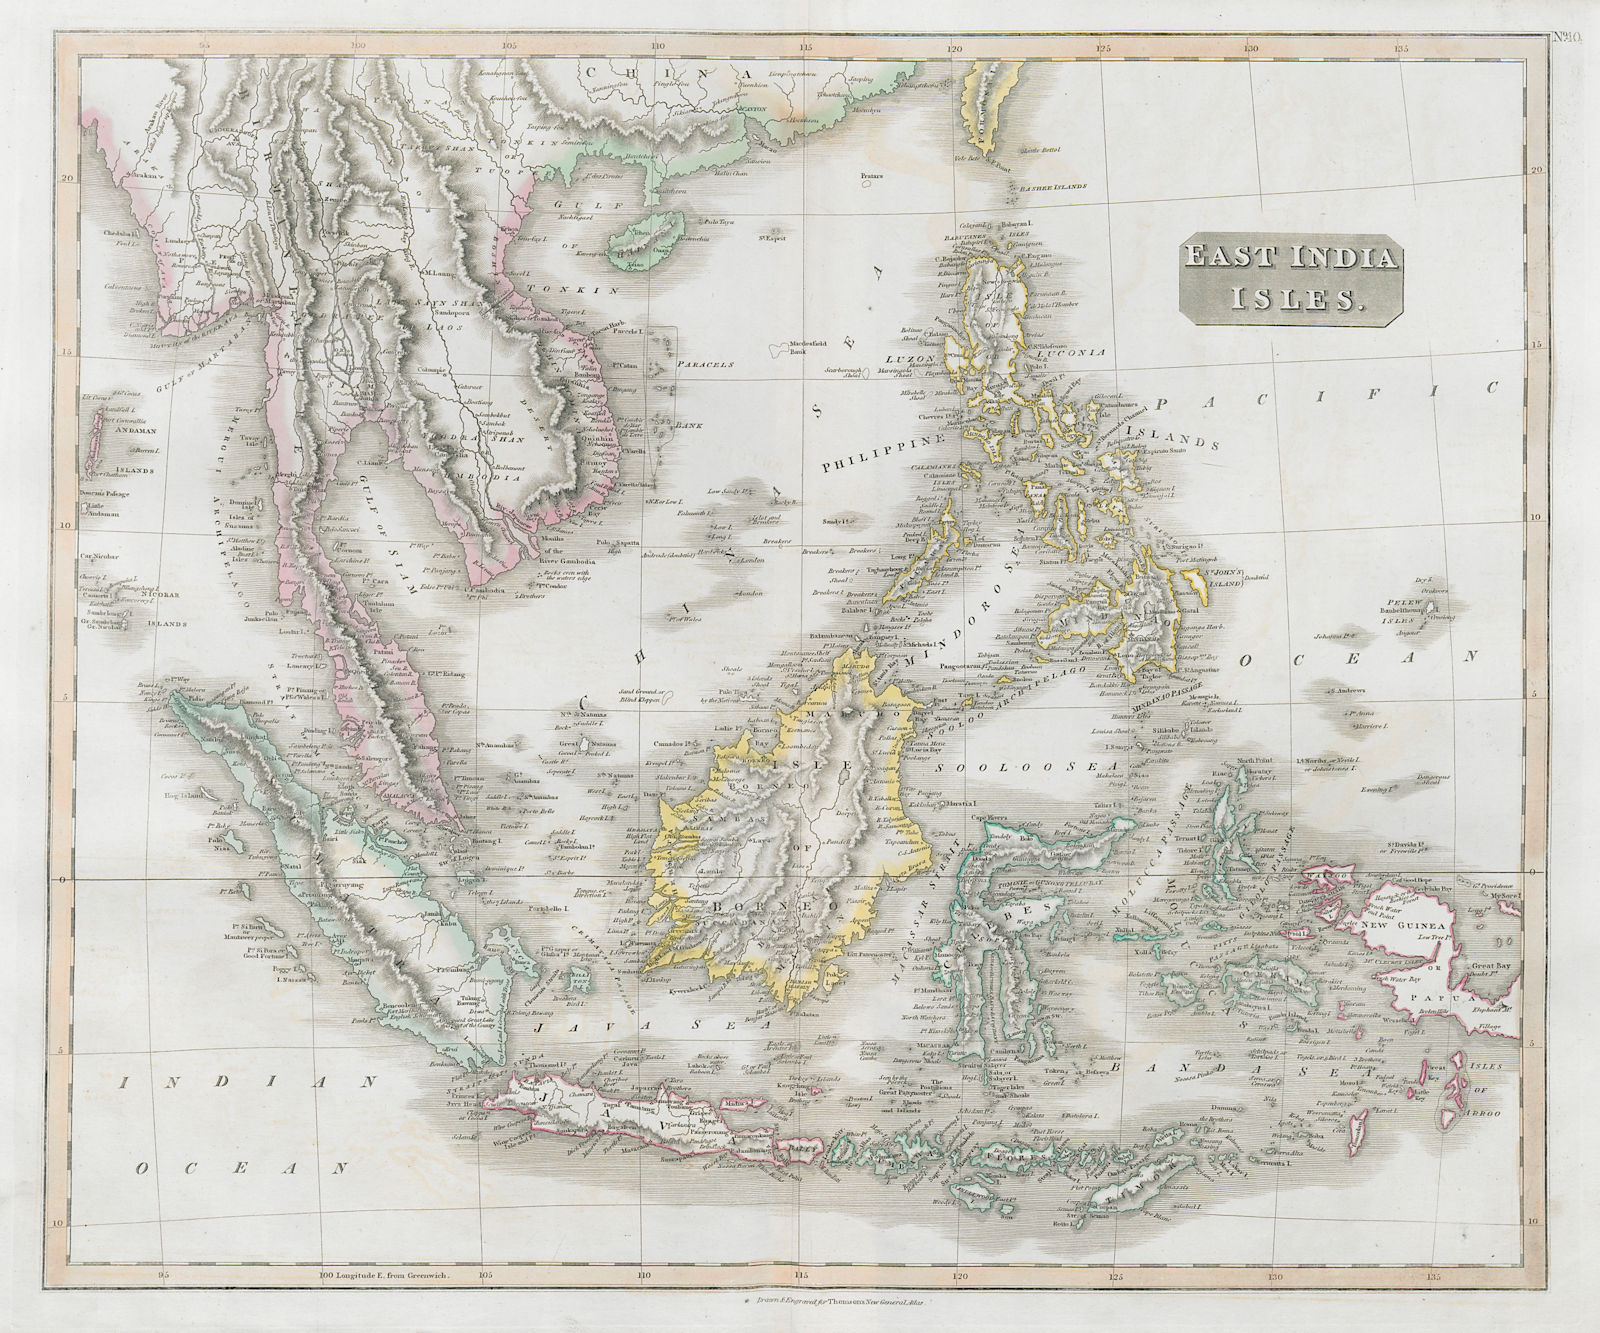 East India Isles & Indochina. Dutch East Indies. Philippines. THOMSON 1830 map